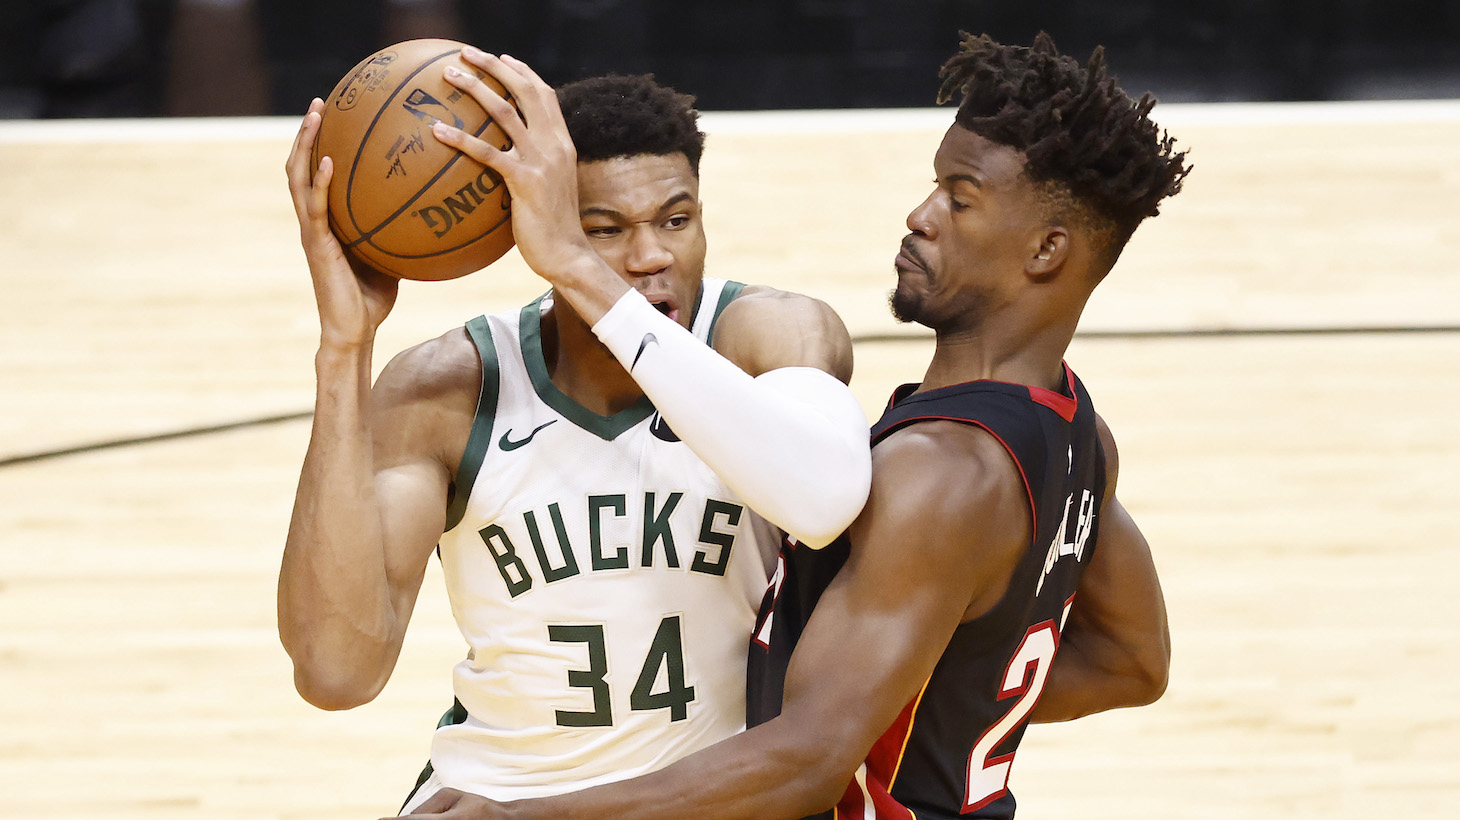 MIAMI, FLORIDA - MAY 27: Giannis Antetokounmpo #34 of the Milwaukee Bucks drives to the basket against Jimmy Butler #22 of the Miami Heat during the third quarter in Game Three of the Eastern Conference first-round playoff series at American Airlines Arena on May 27, 2021 in Miami, Florida. NOTE TO USER: User expressly acknowledges and agrees that, by downloading and or using this photograph, User is consenting to the terms and conditions of the Getty Images License Agreement. (Photo by Michael Reaves/Getty Images)